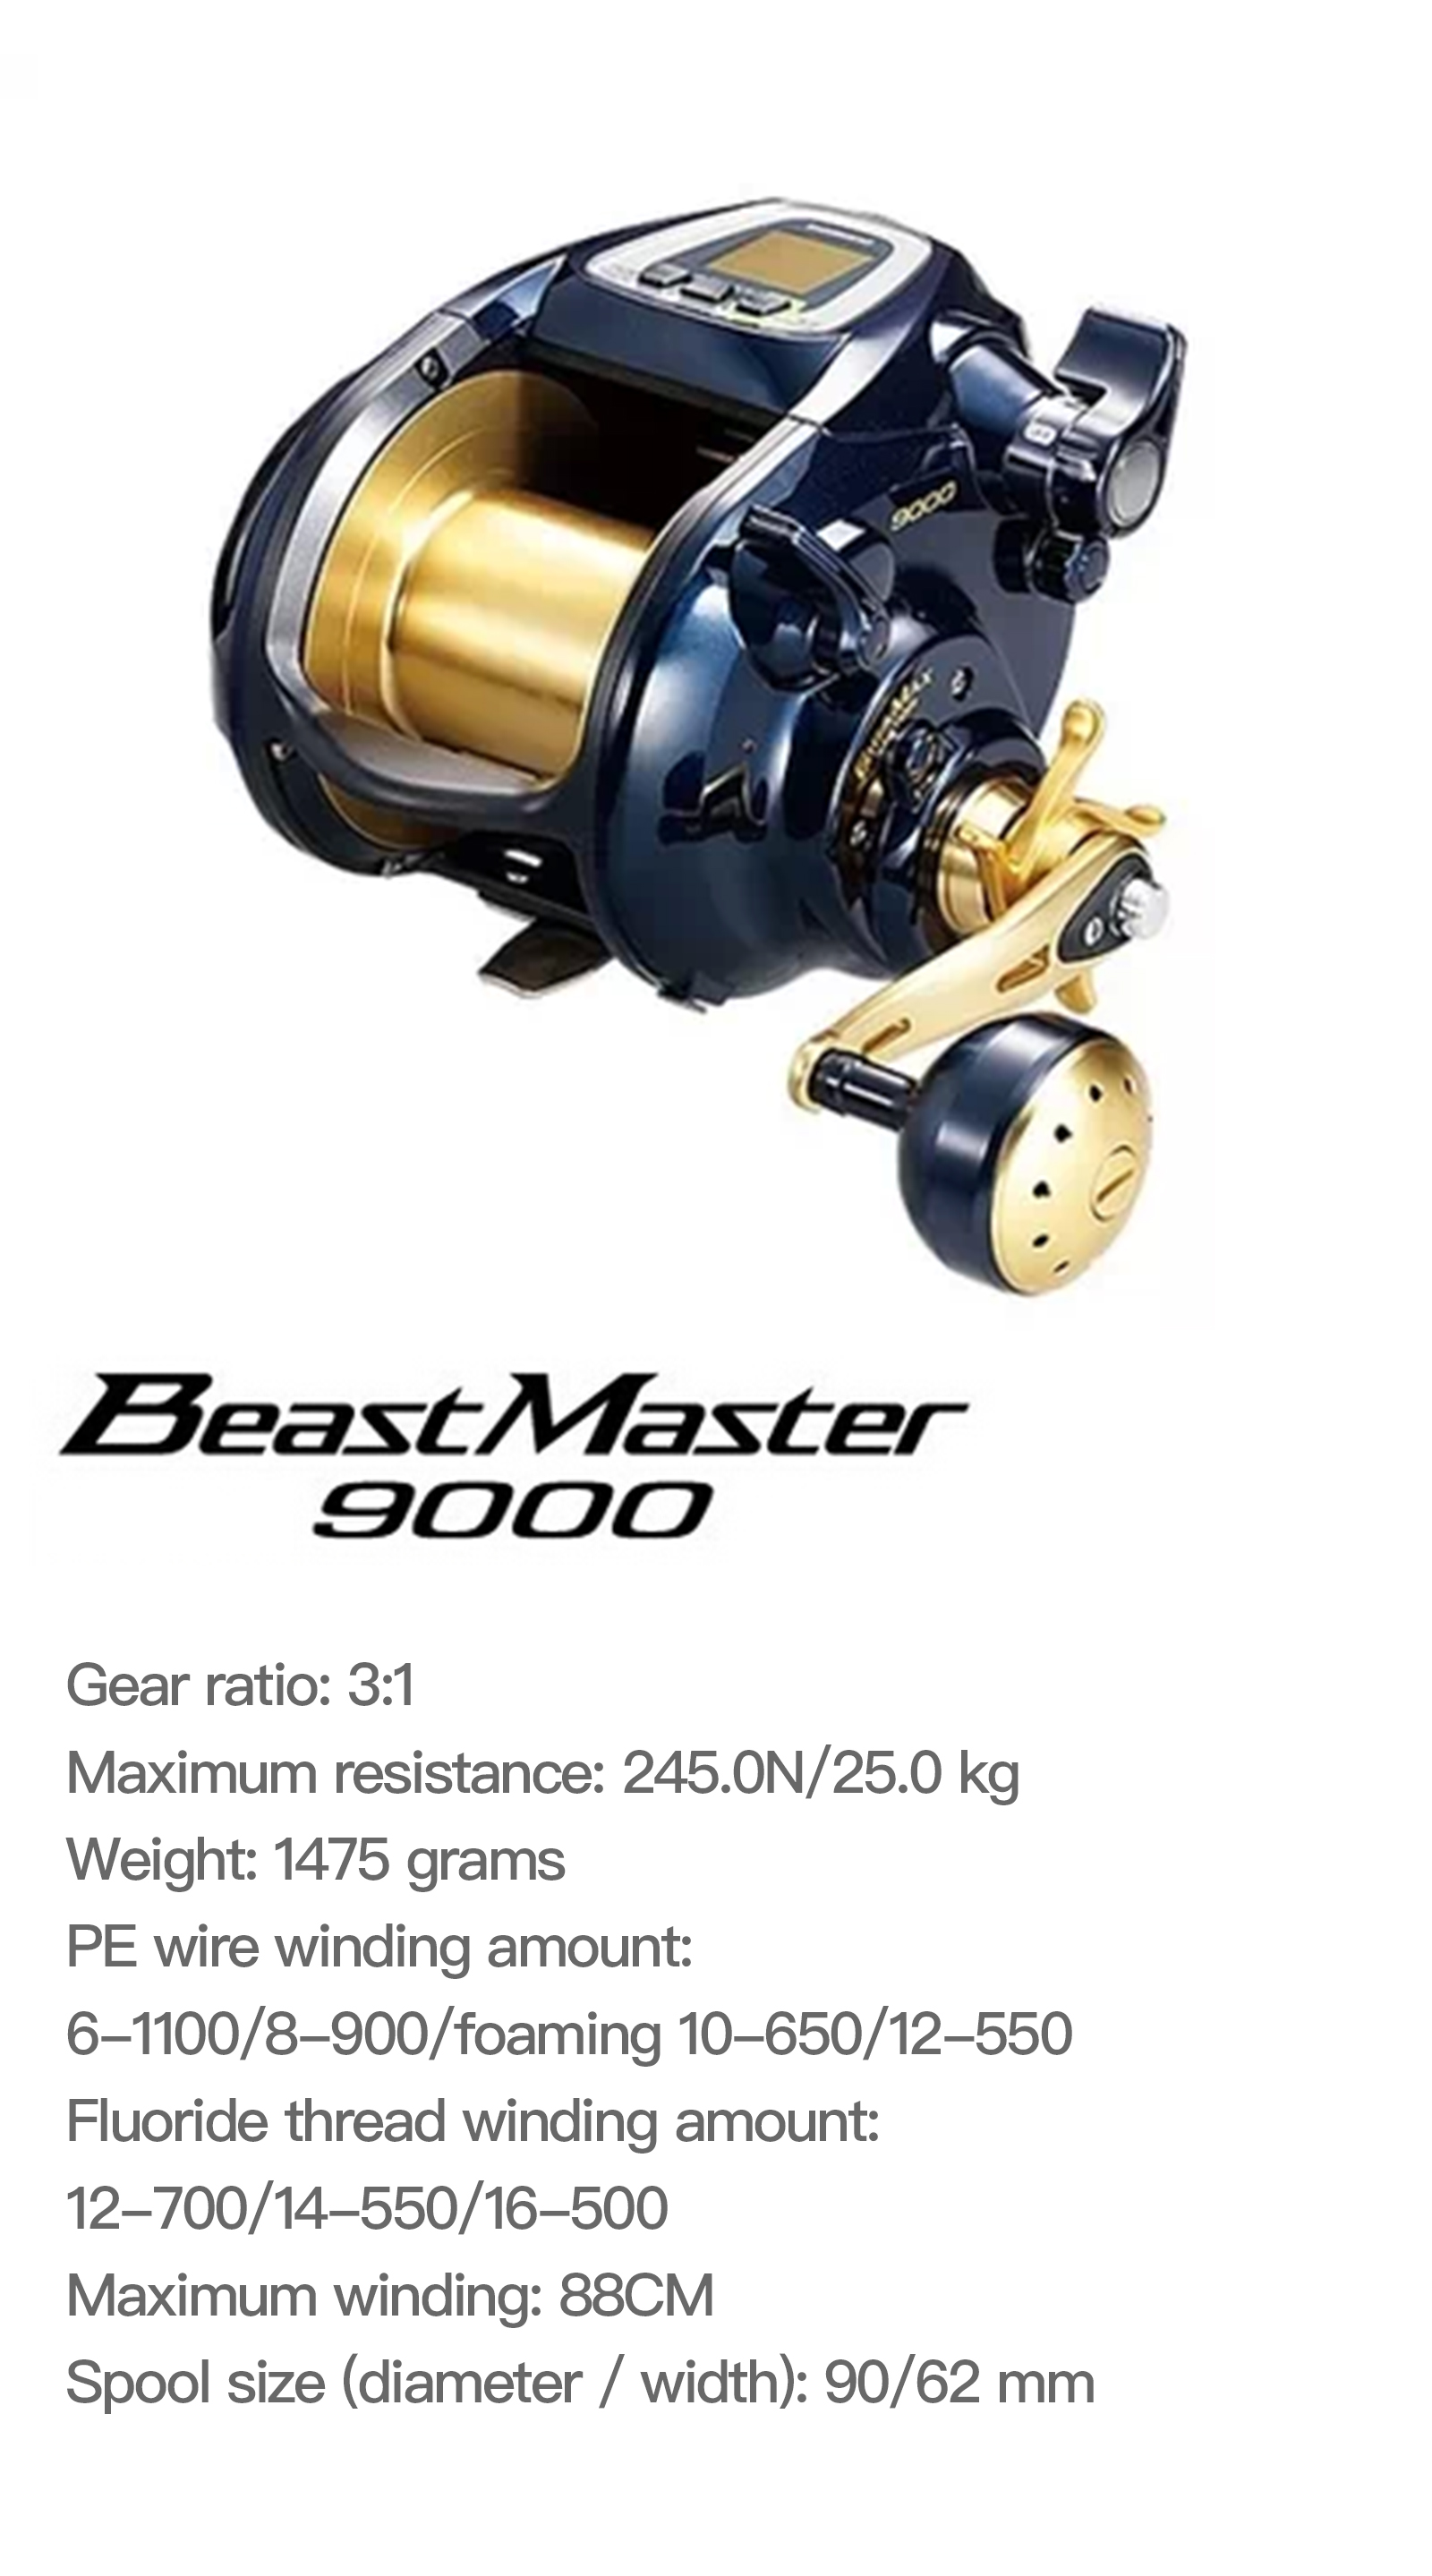 SHIMANO Beastmaster 9000 Electric Reel Diving gear – ottostore